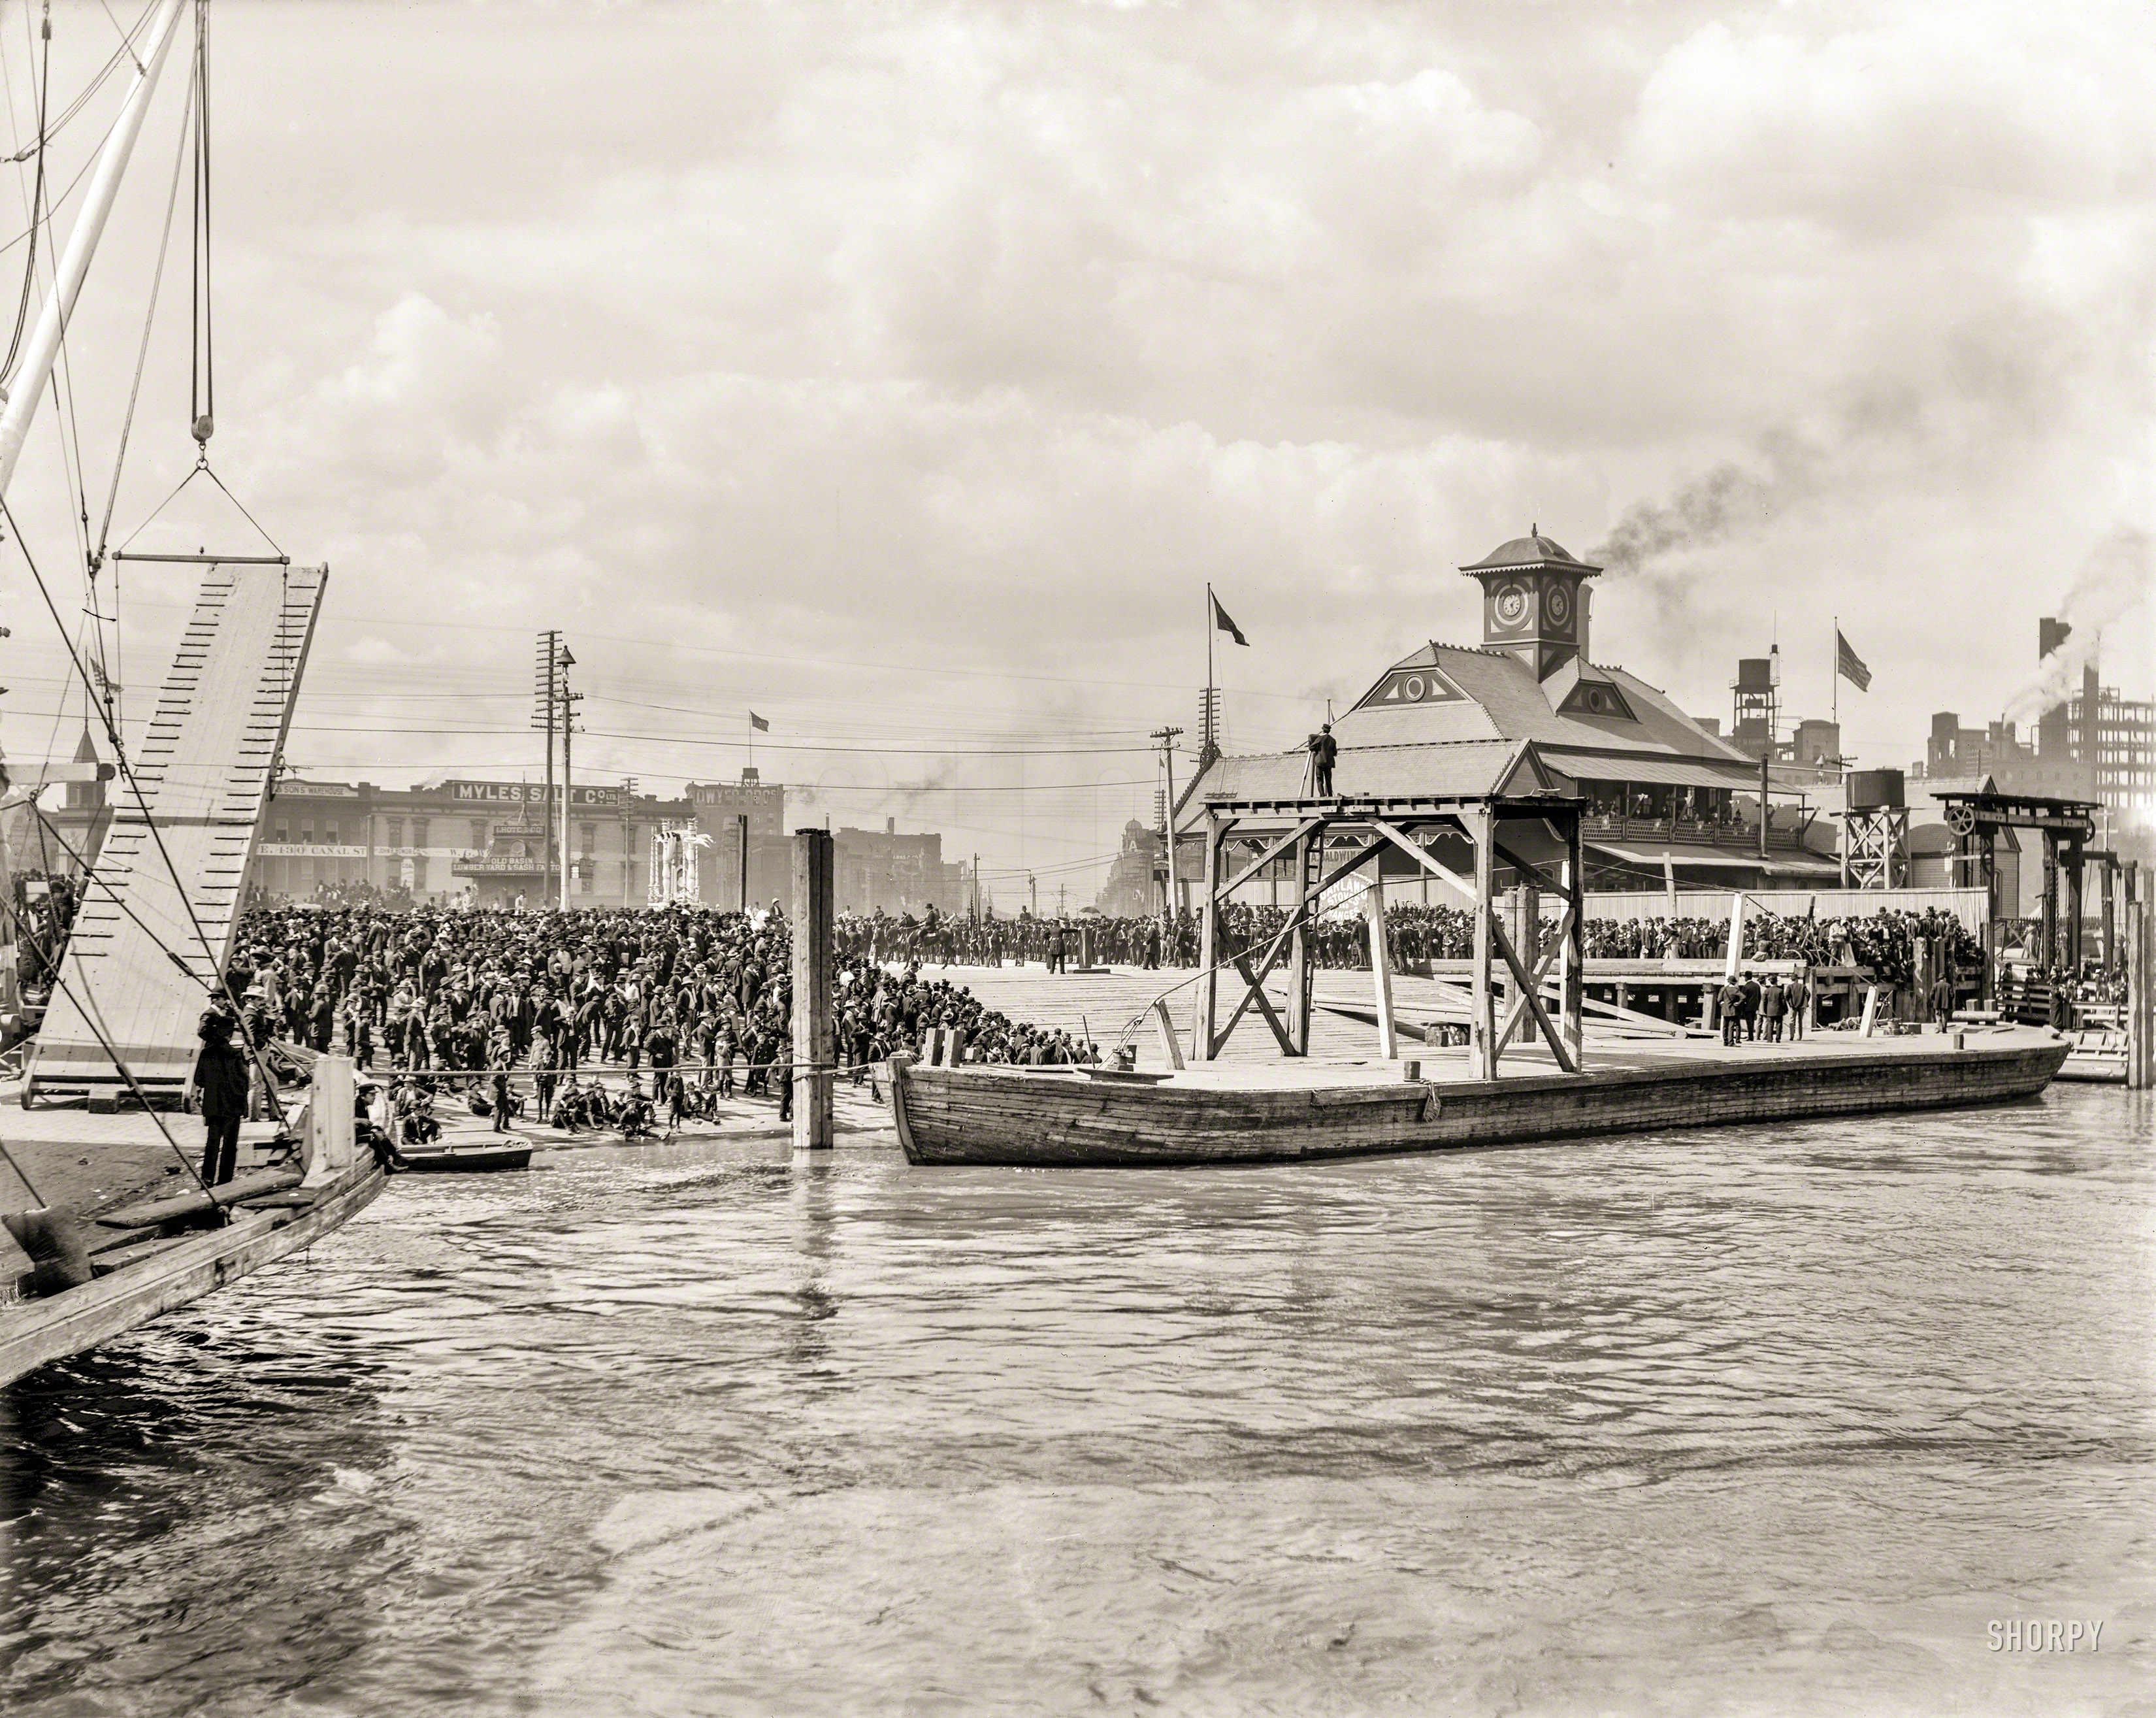 The Mississippi River circa 1900. "Mardi Gras, New Orleans. Awaiting Rex on the levee." 8x10 inch dry plate glass negative, Detroit Publishing Co. View full size.